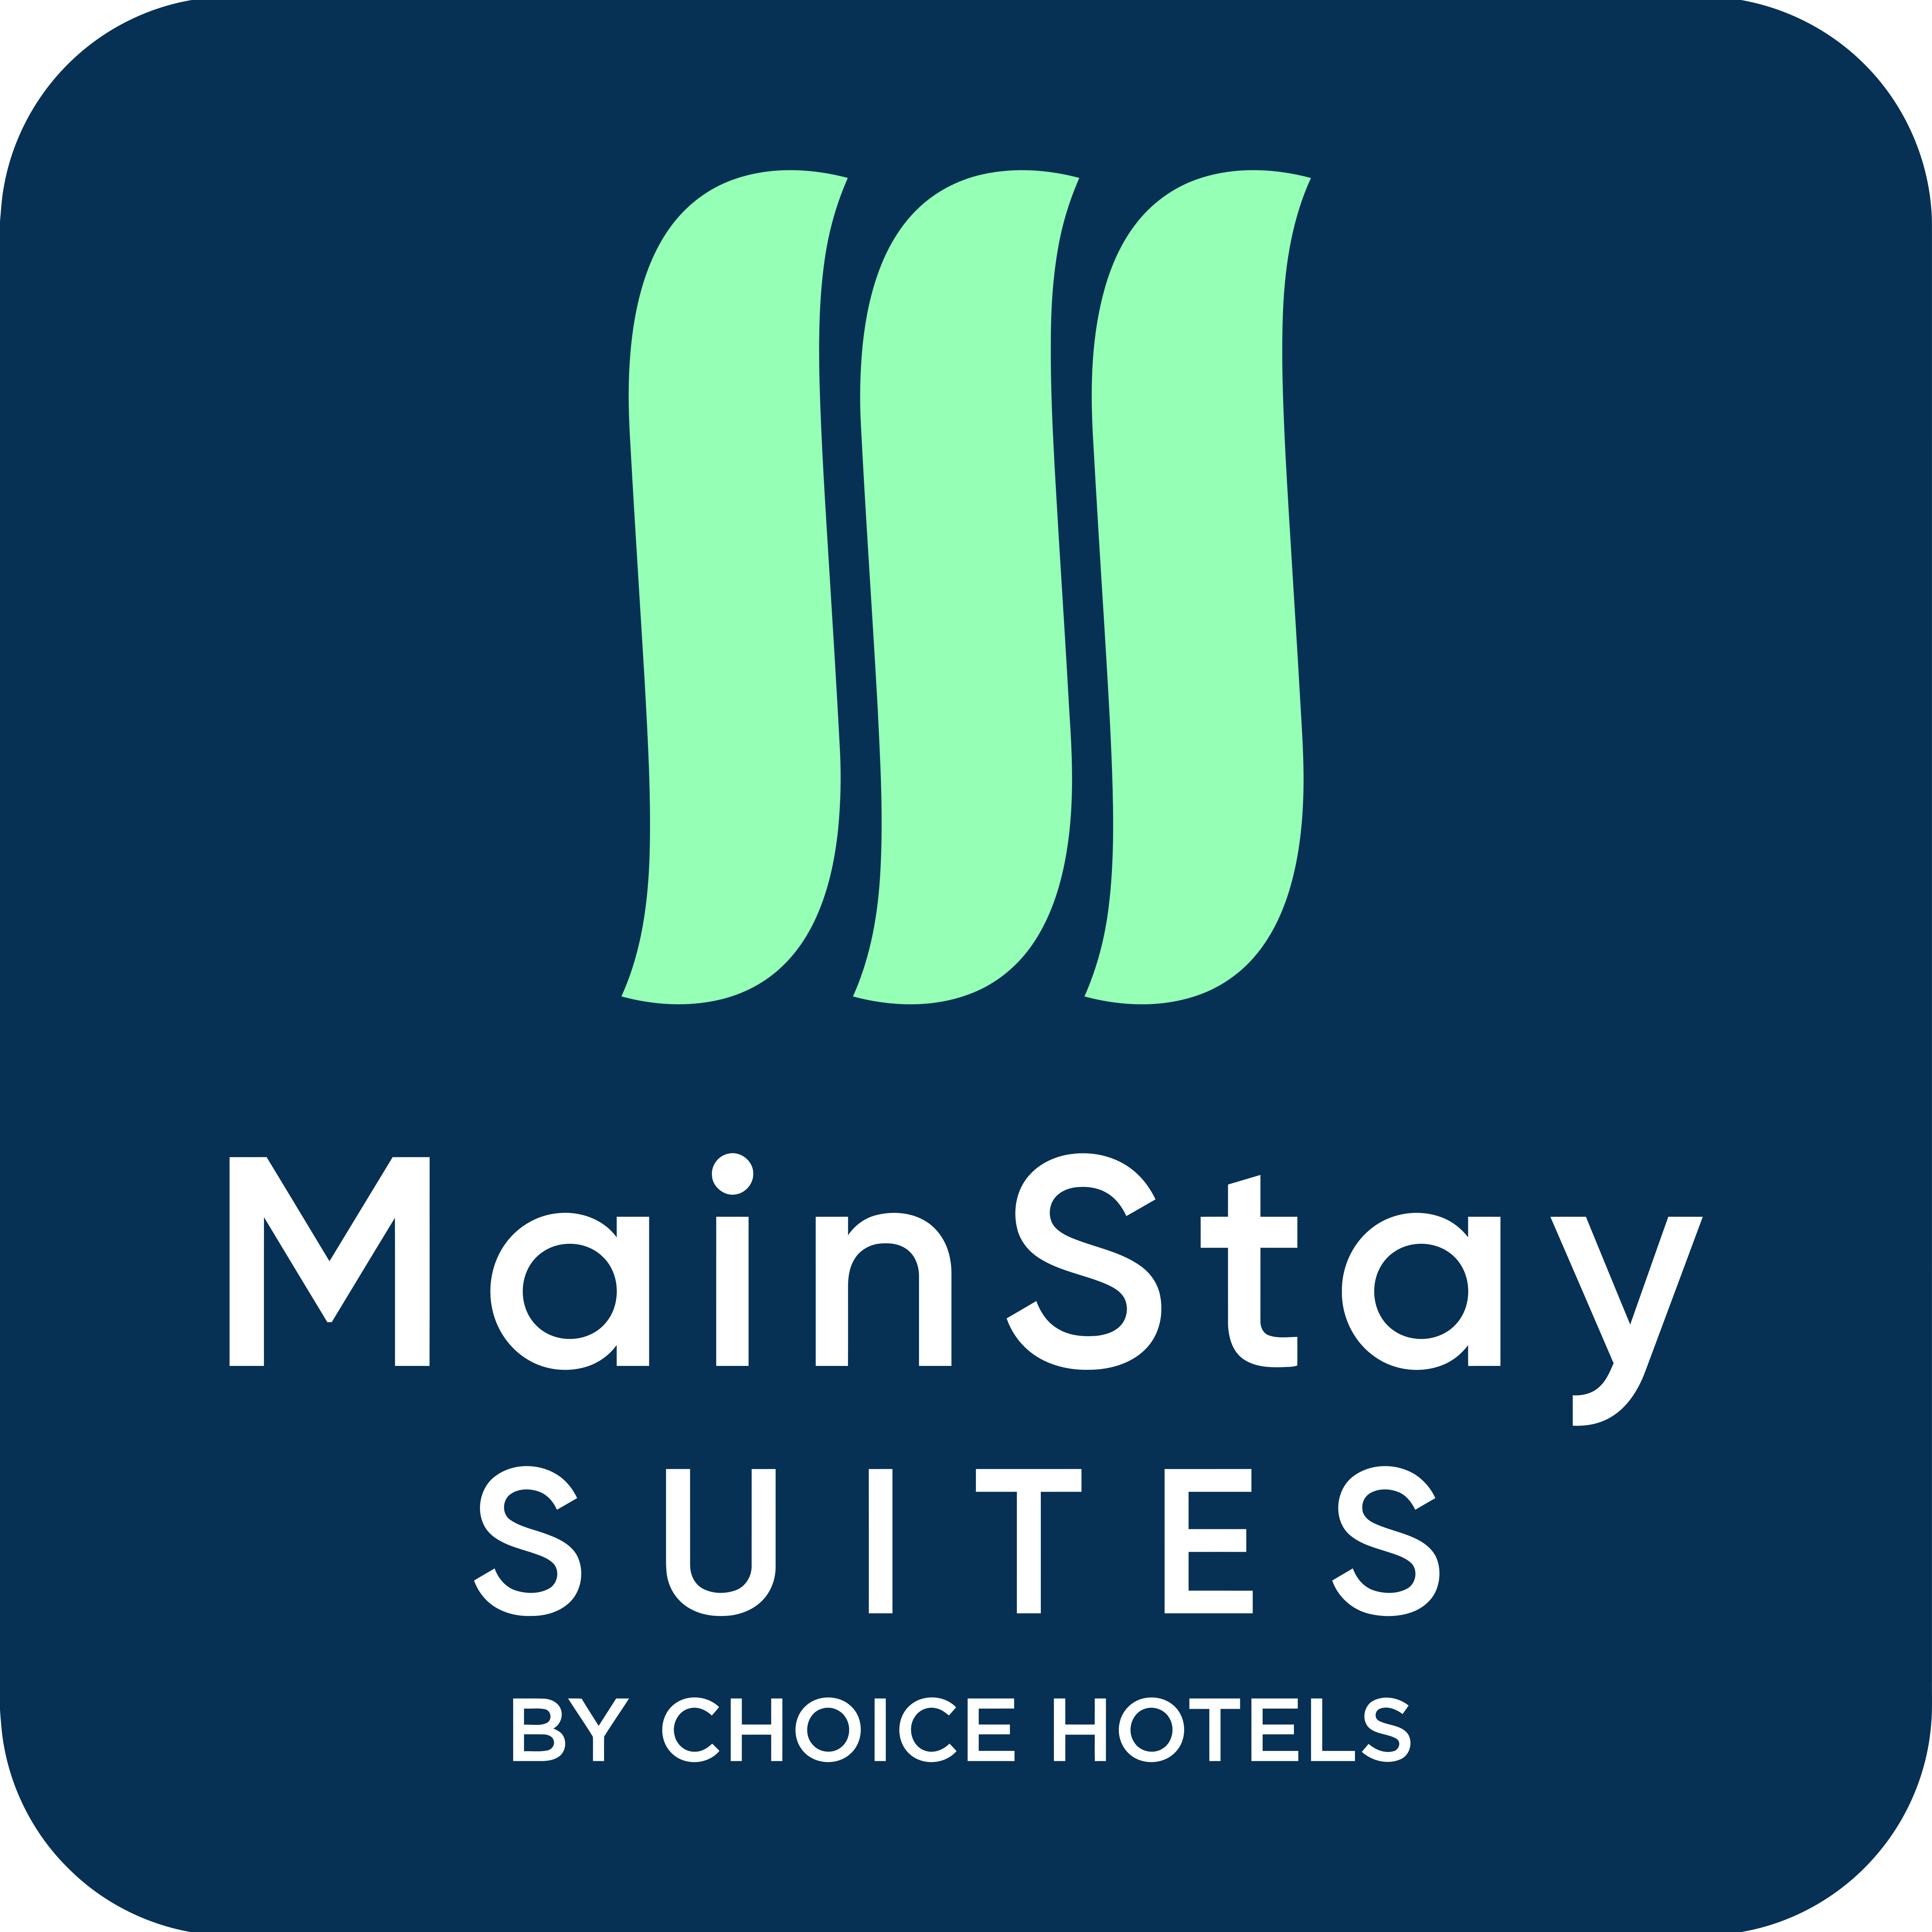 Mainstay Suites – Logos Download